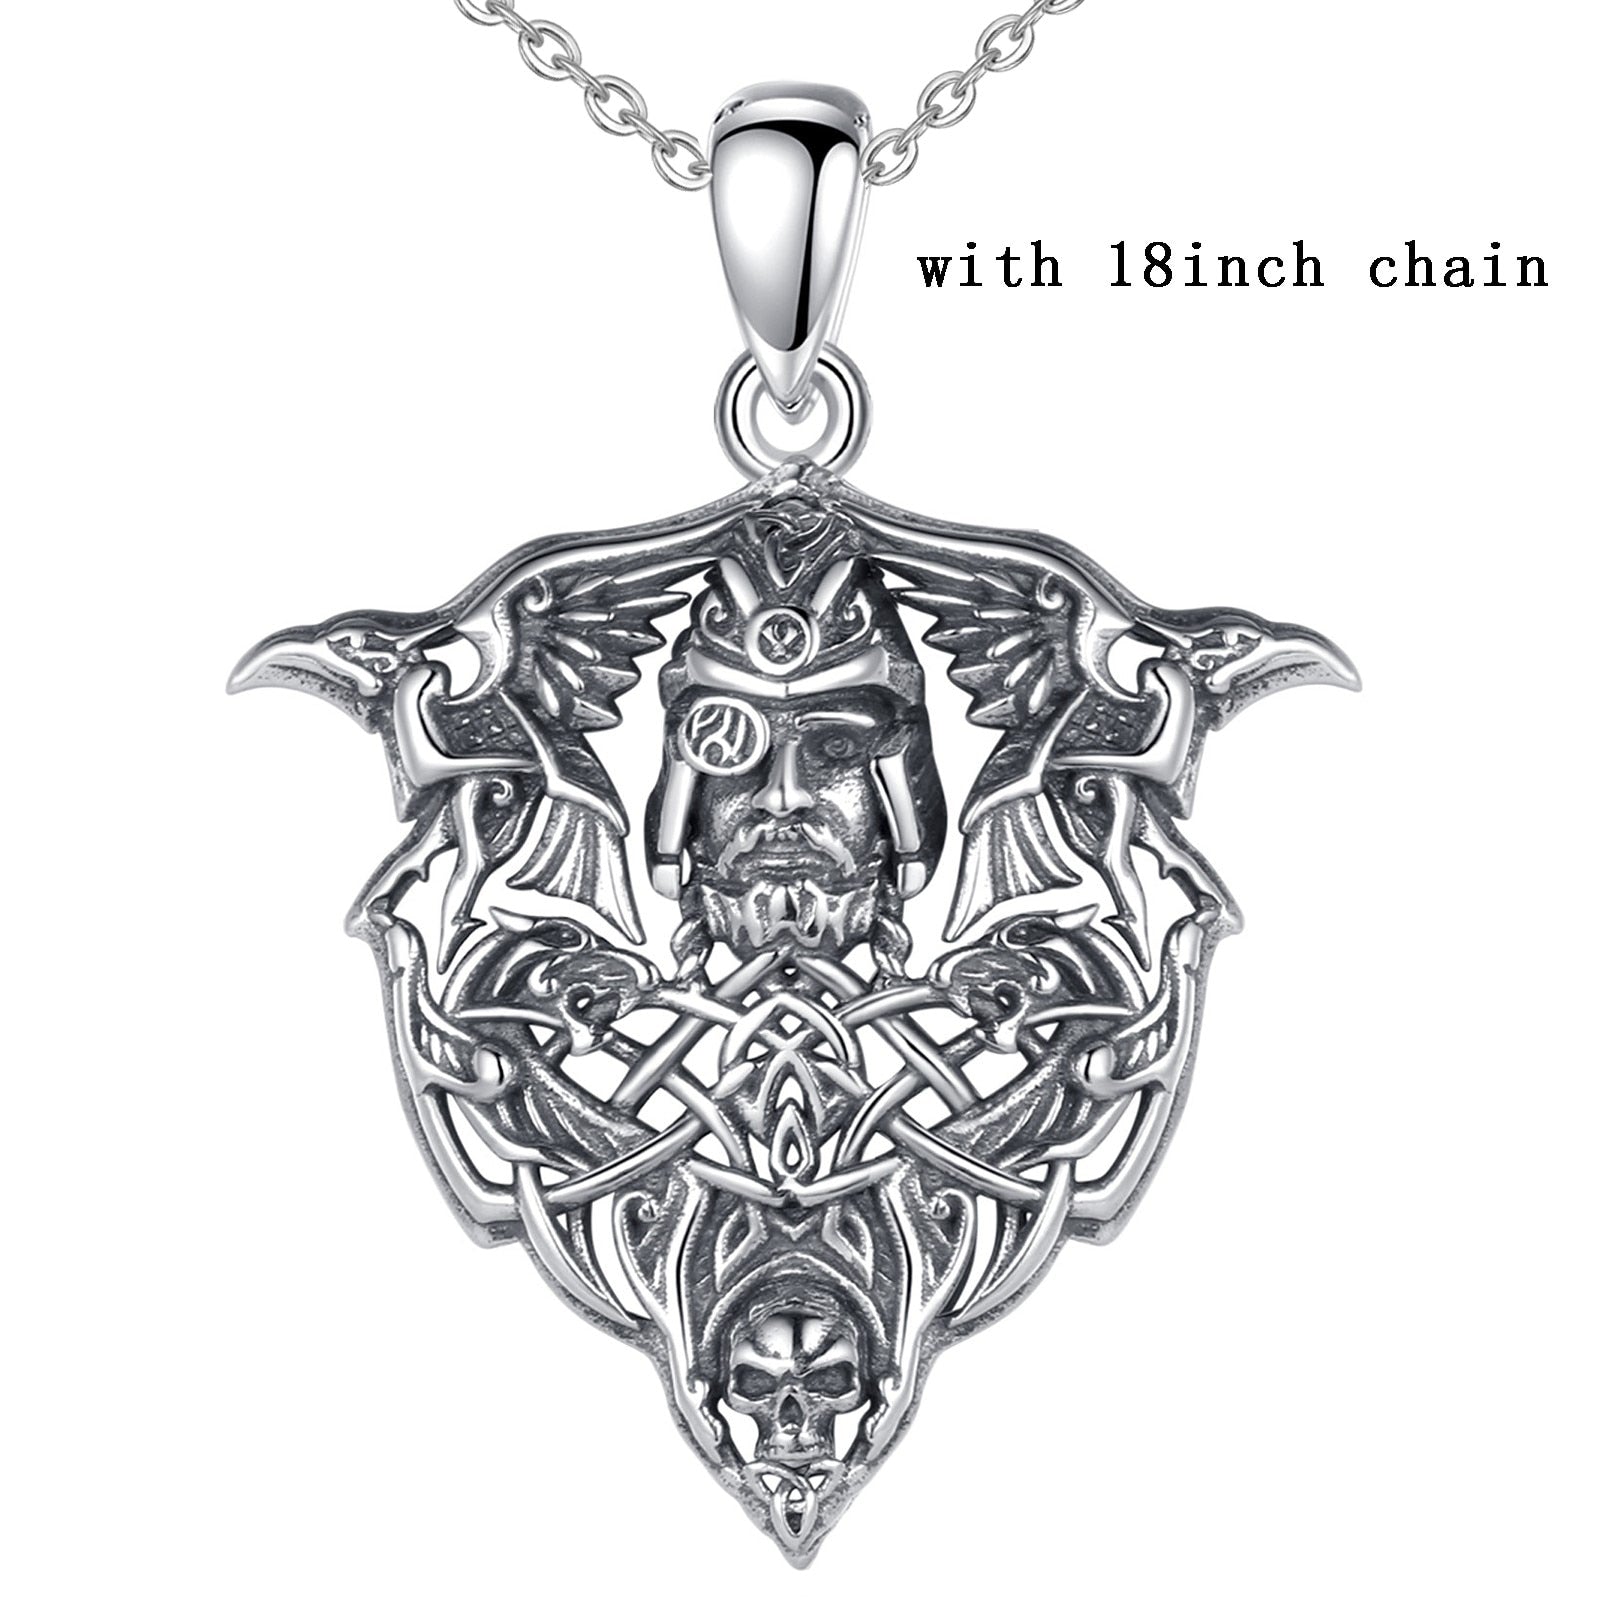 Odin With His Ravens Hugin and Munin 925 Sterling Silver Necklace